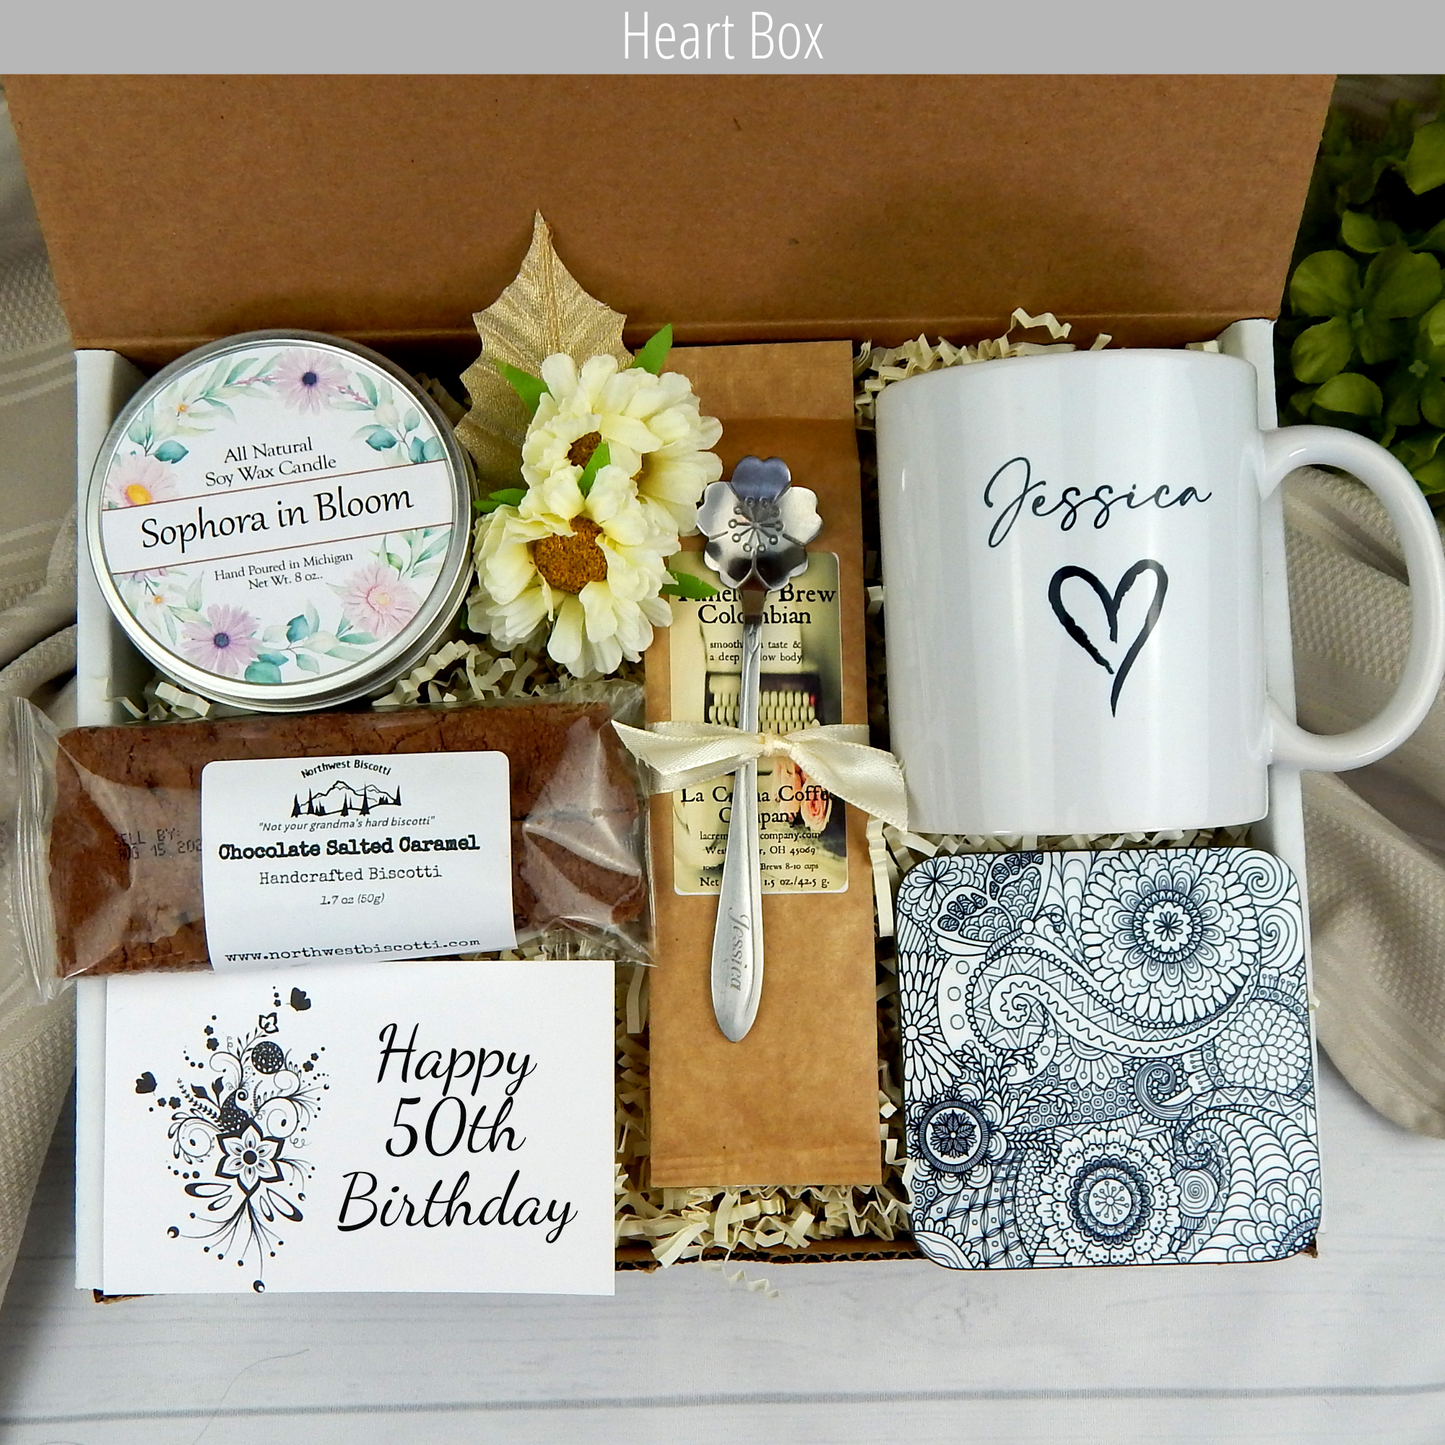 Cheers to five decades: Women's birthday gift basket featuring a personalized name mug, gourmet coffee, and sweet goodies with heart mug